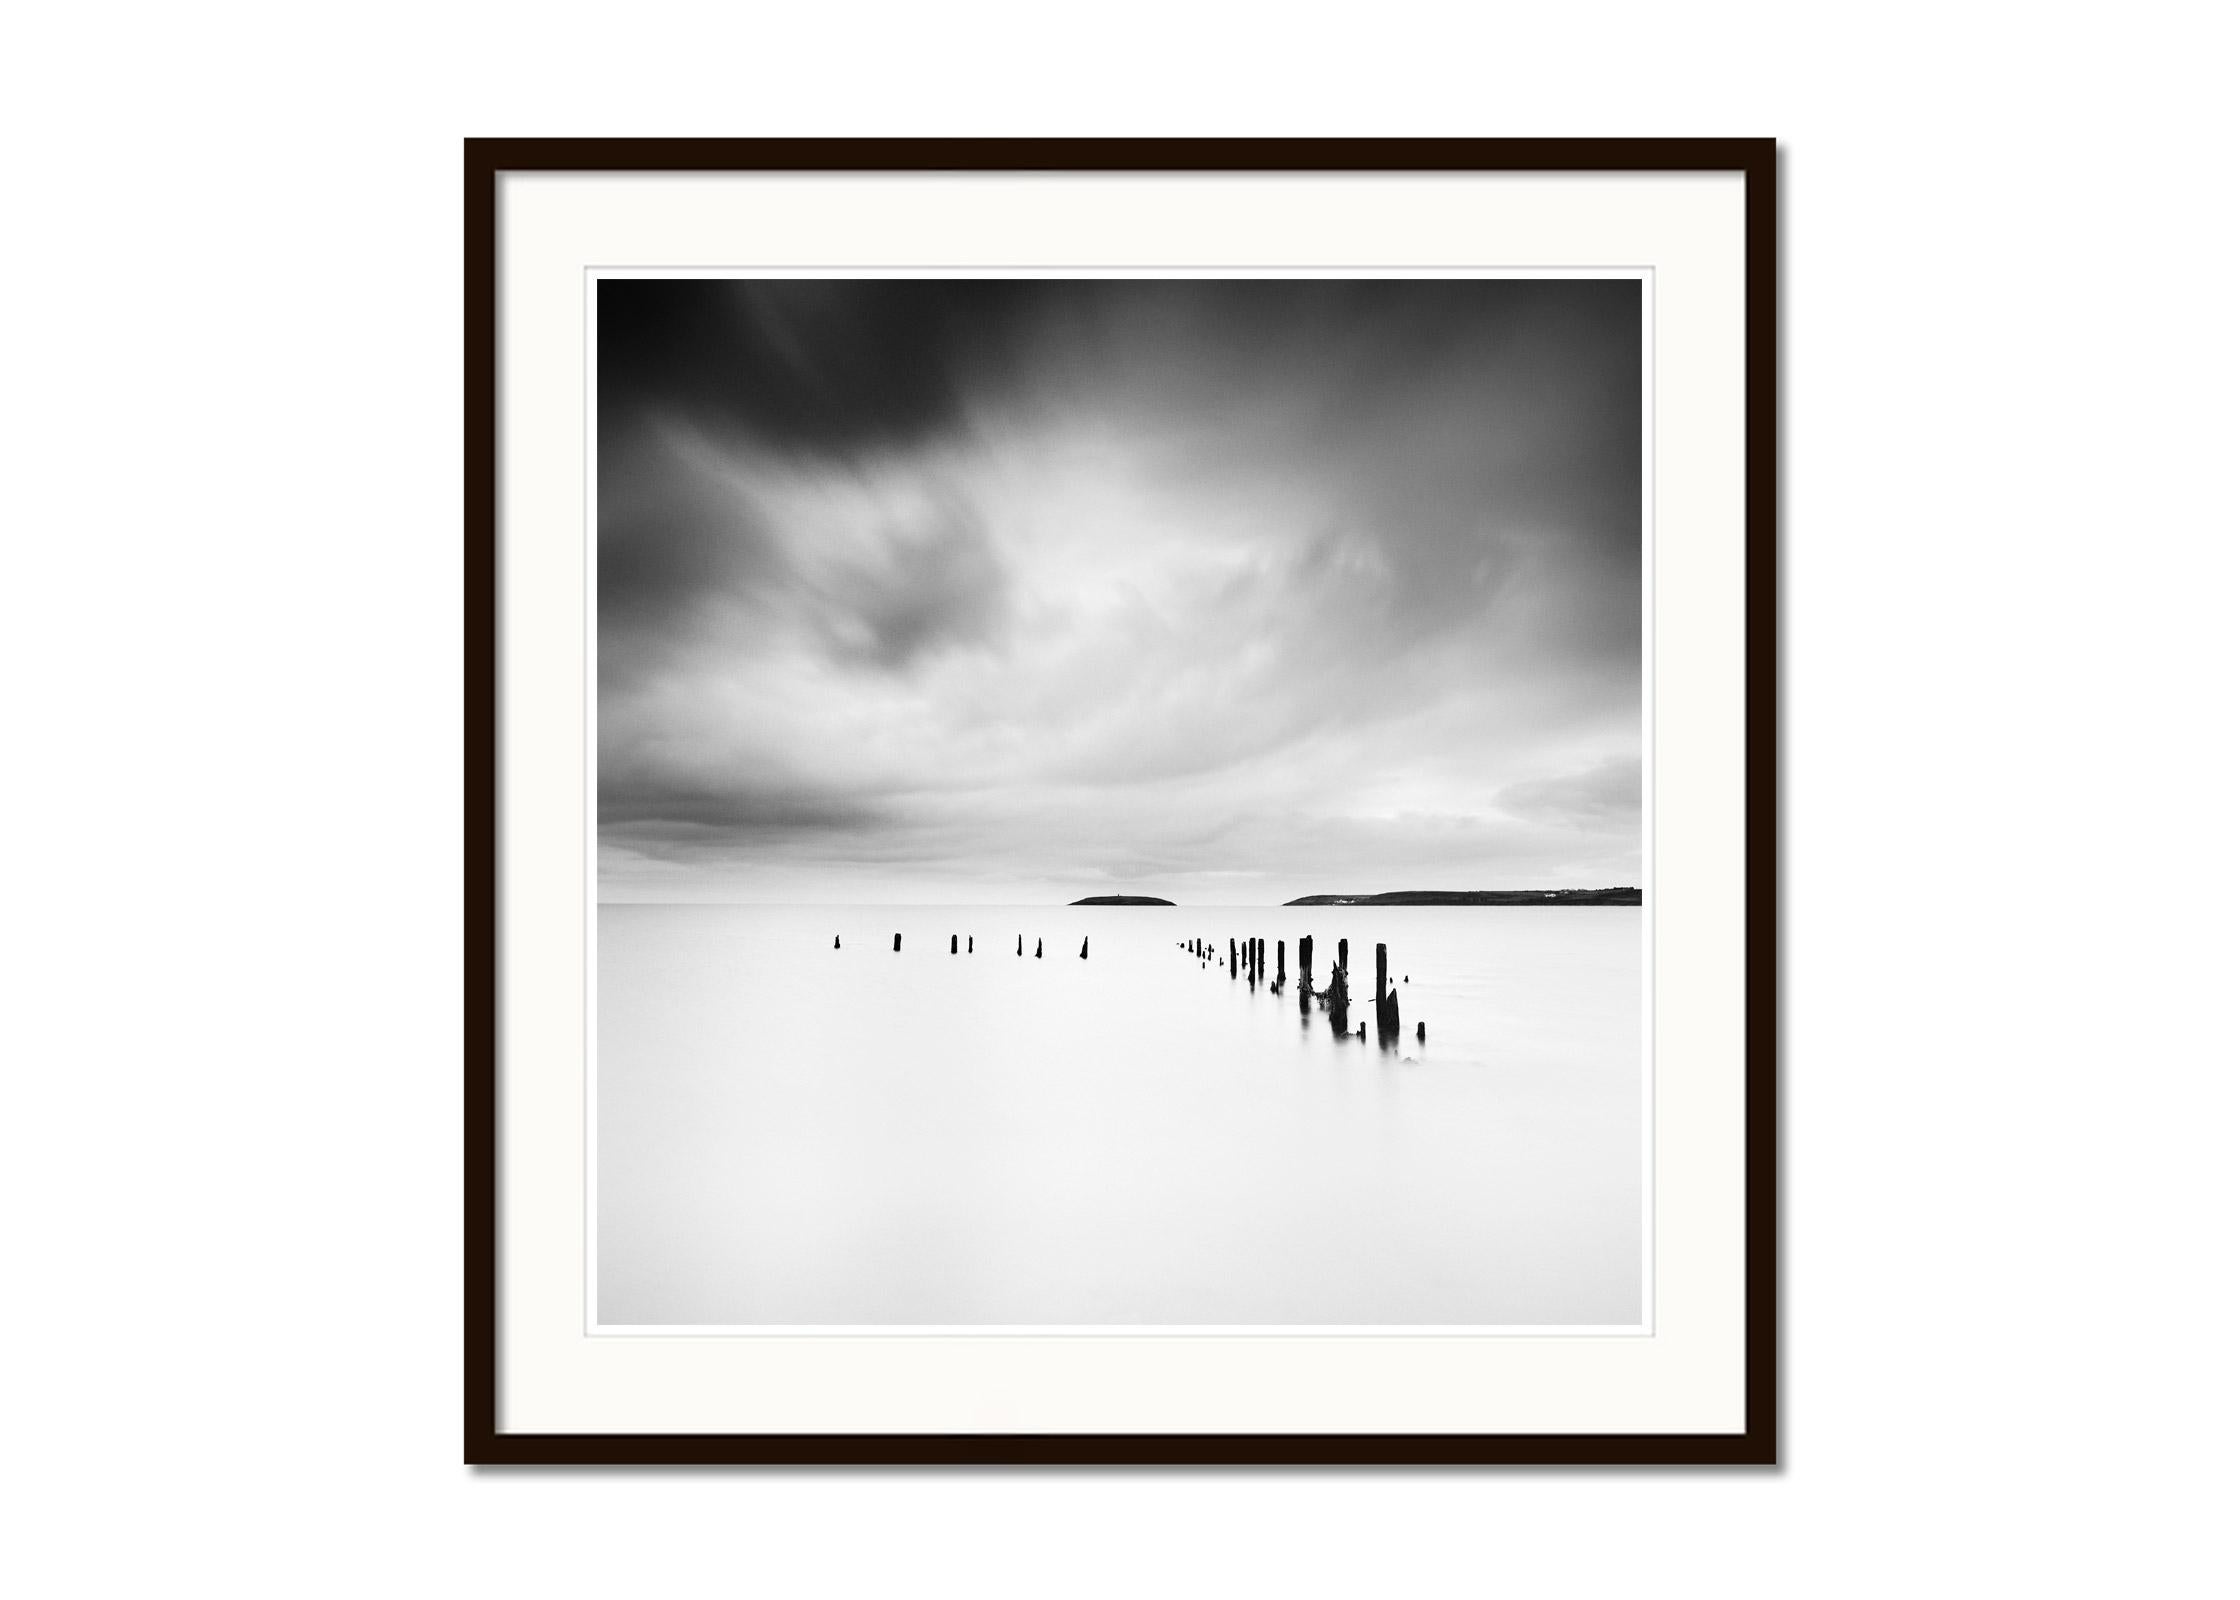 The Island, wavebreaker, stormy, Ireland, black and white landscape photography - Contemporary Photograph by Gerald Berghammer